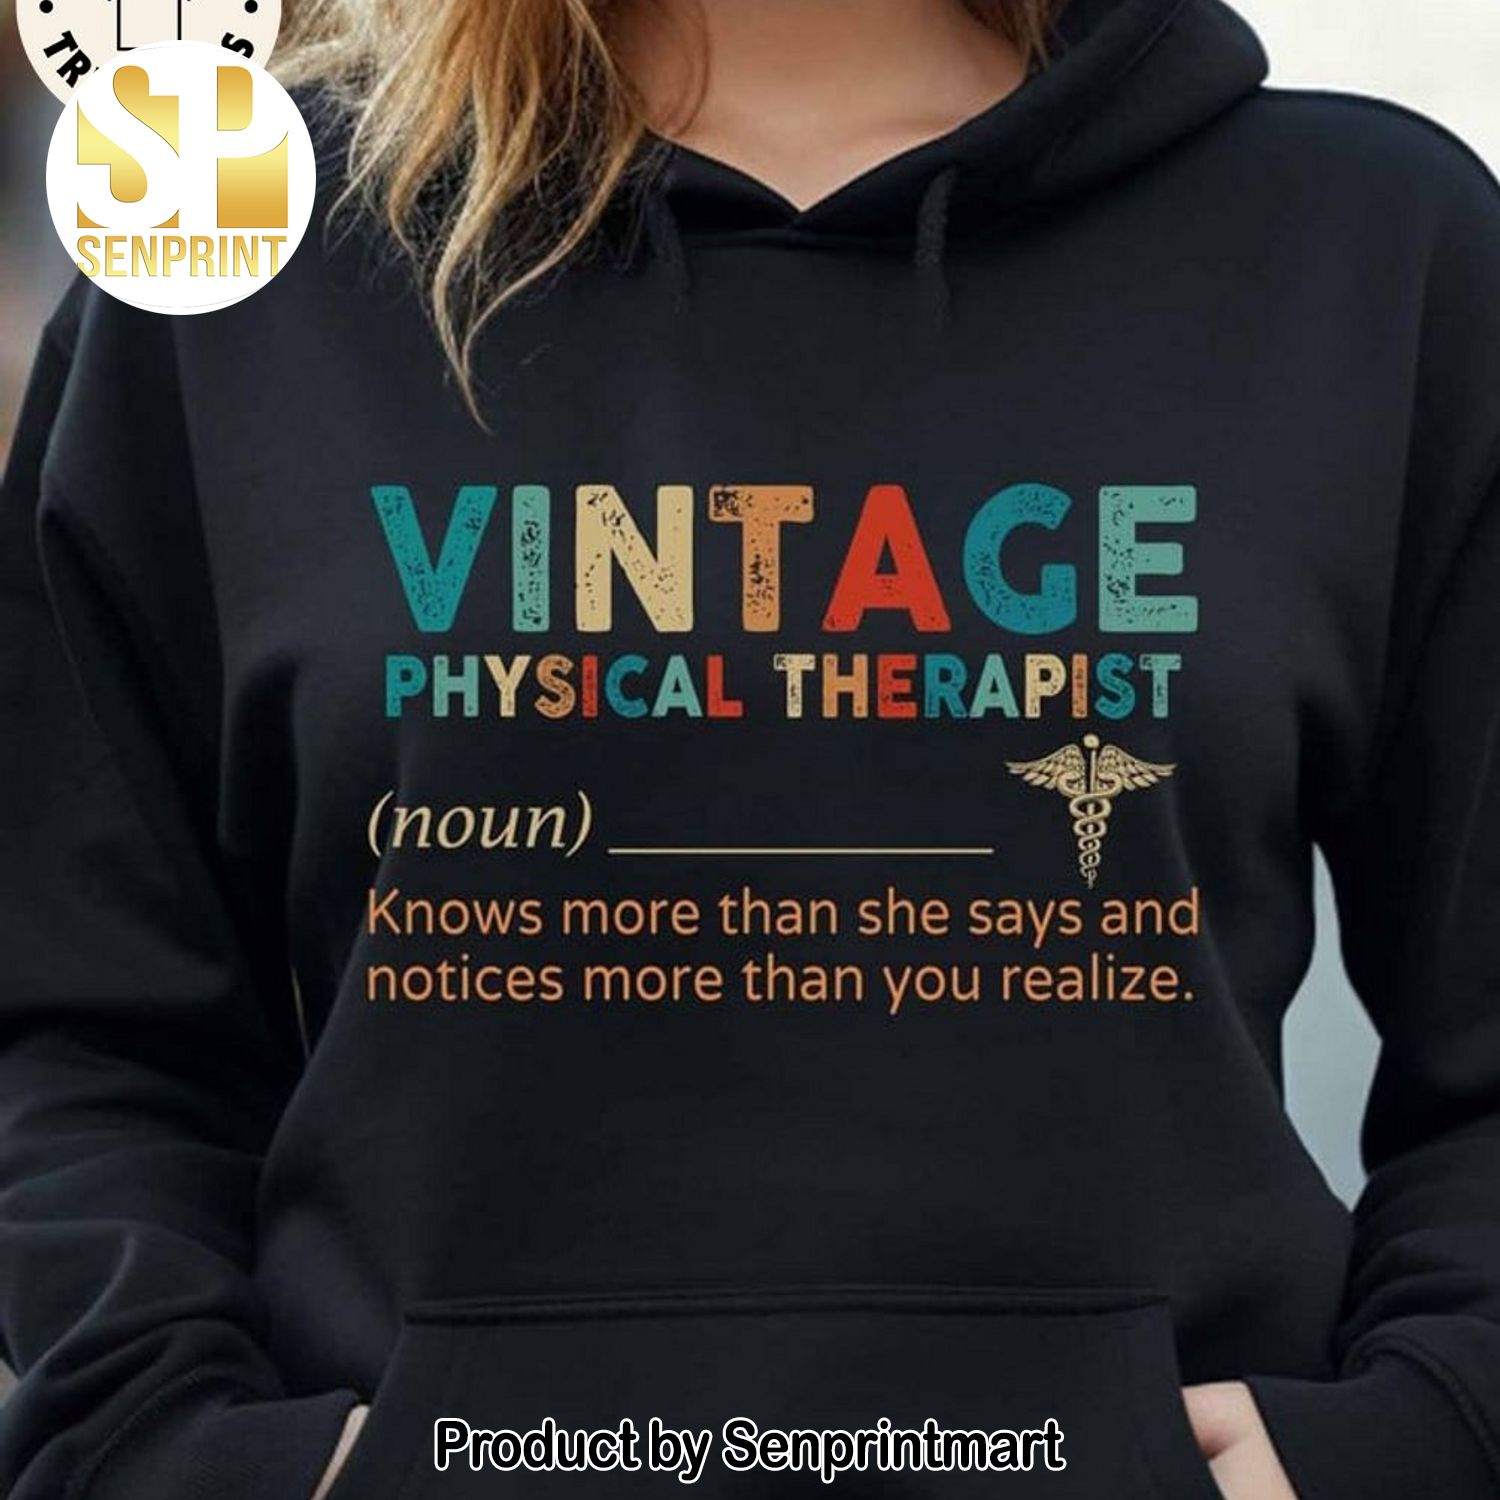 Vintage Physical Therapist 3D Shirt